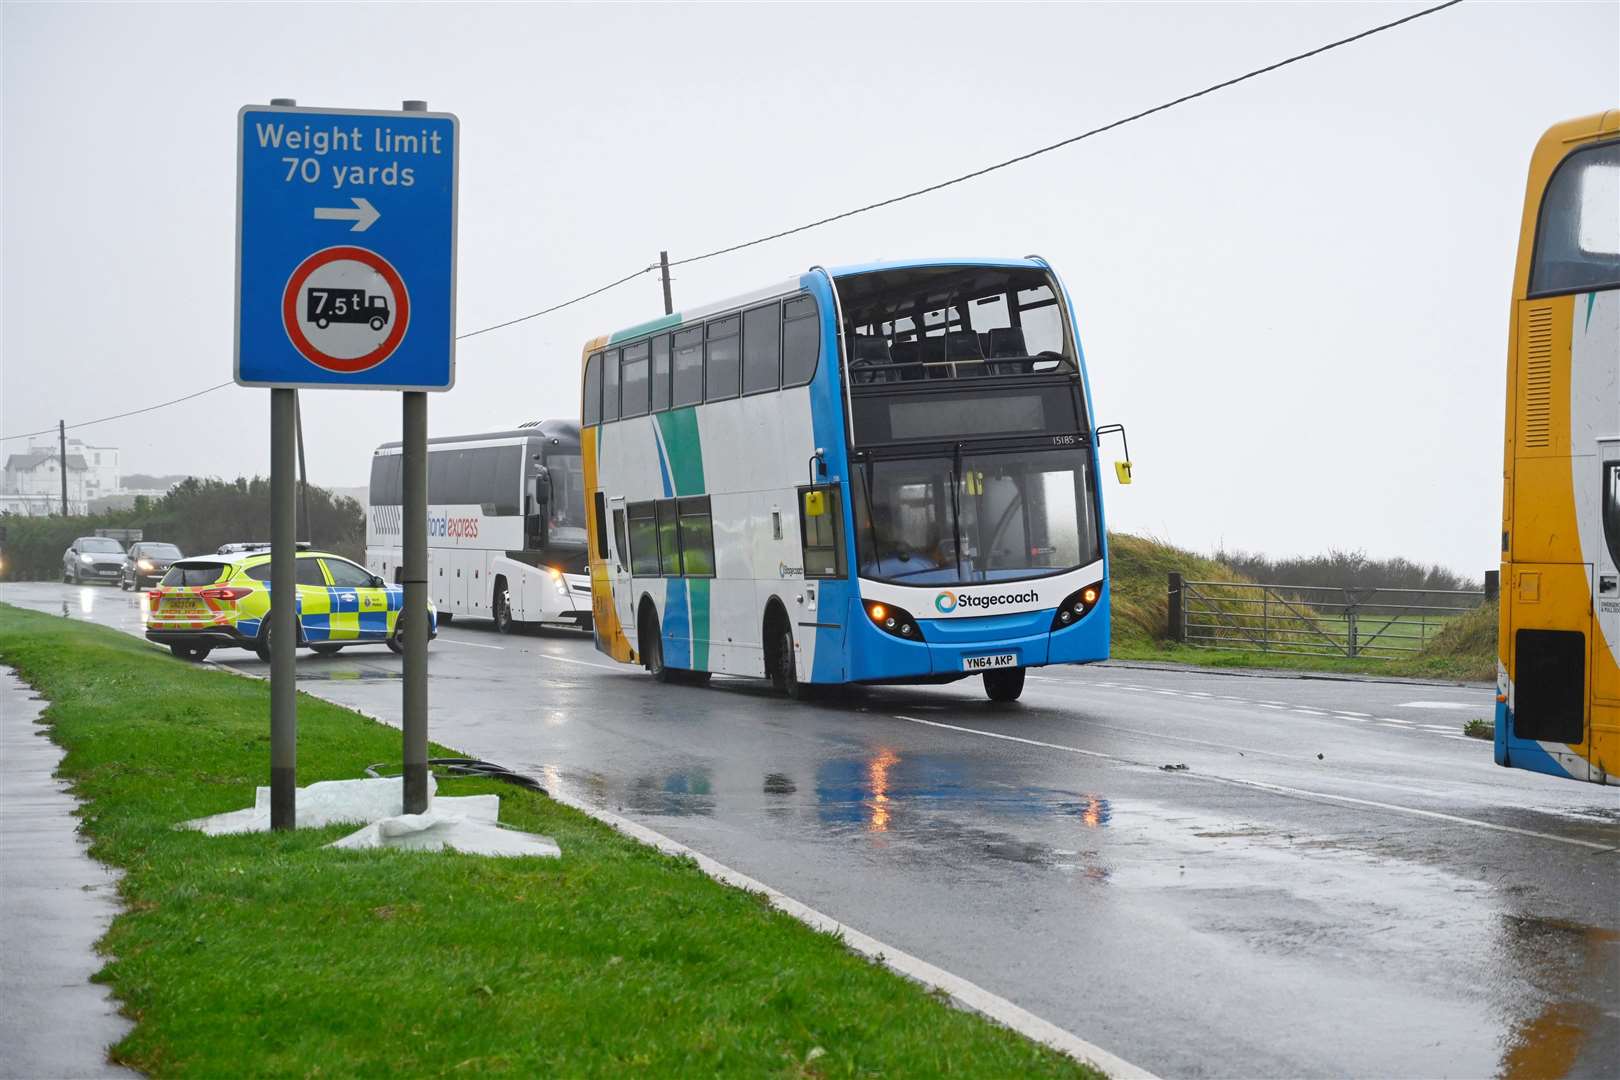 The wind shook the bus. Picture: Barry Goodwin